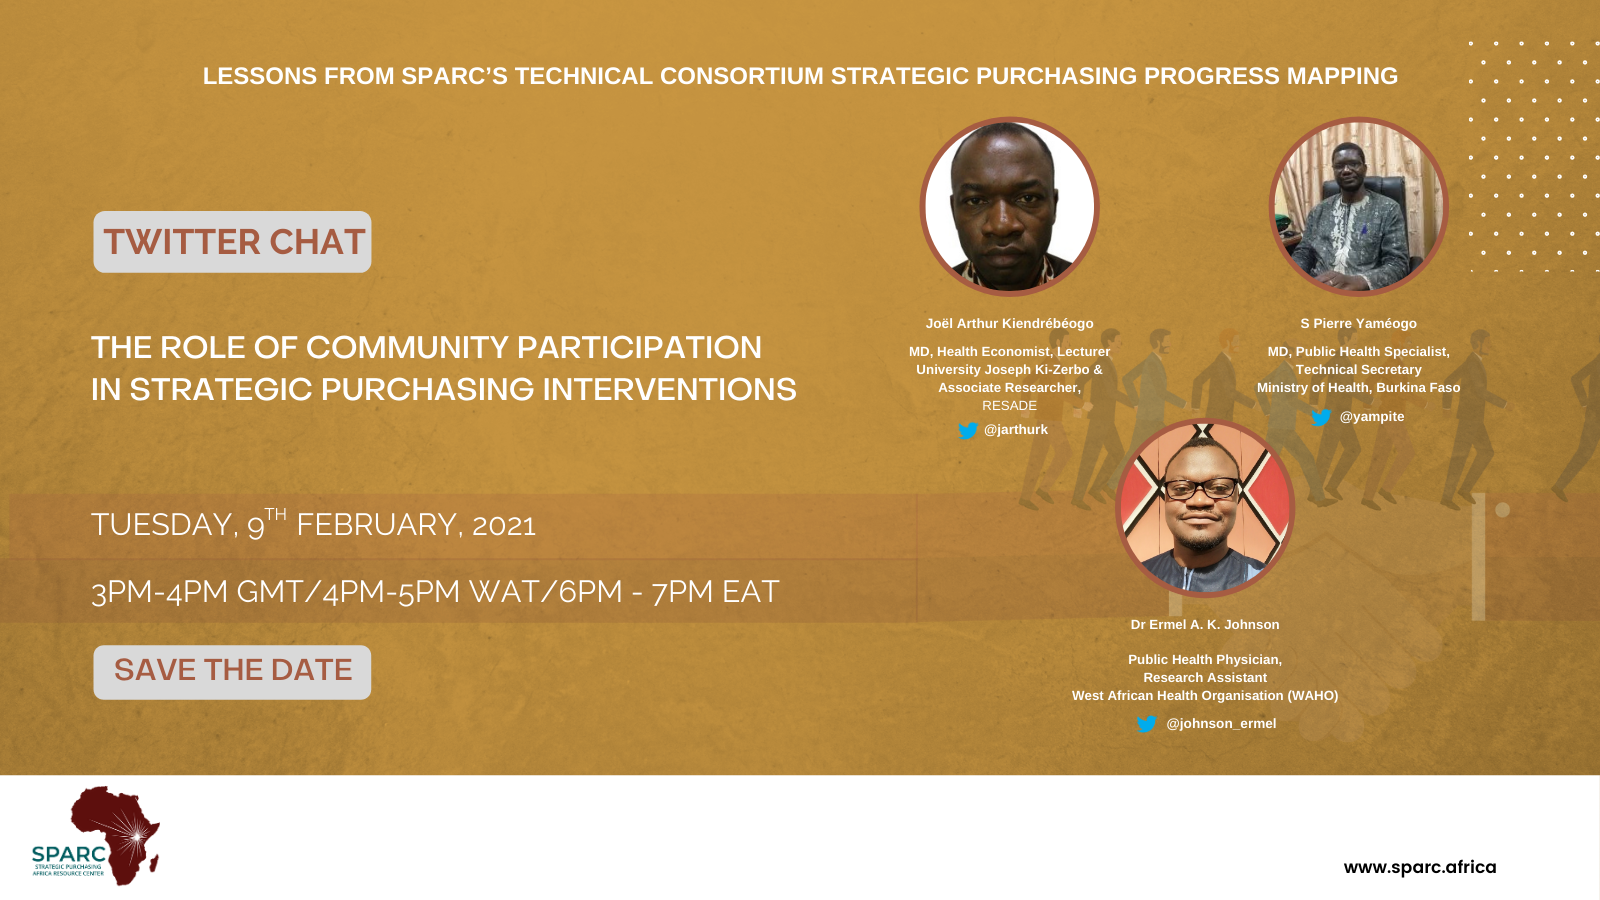 February Twitter Chat: ‘The Role of Community Participation in Strategic Purchasing Interventions’